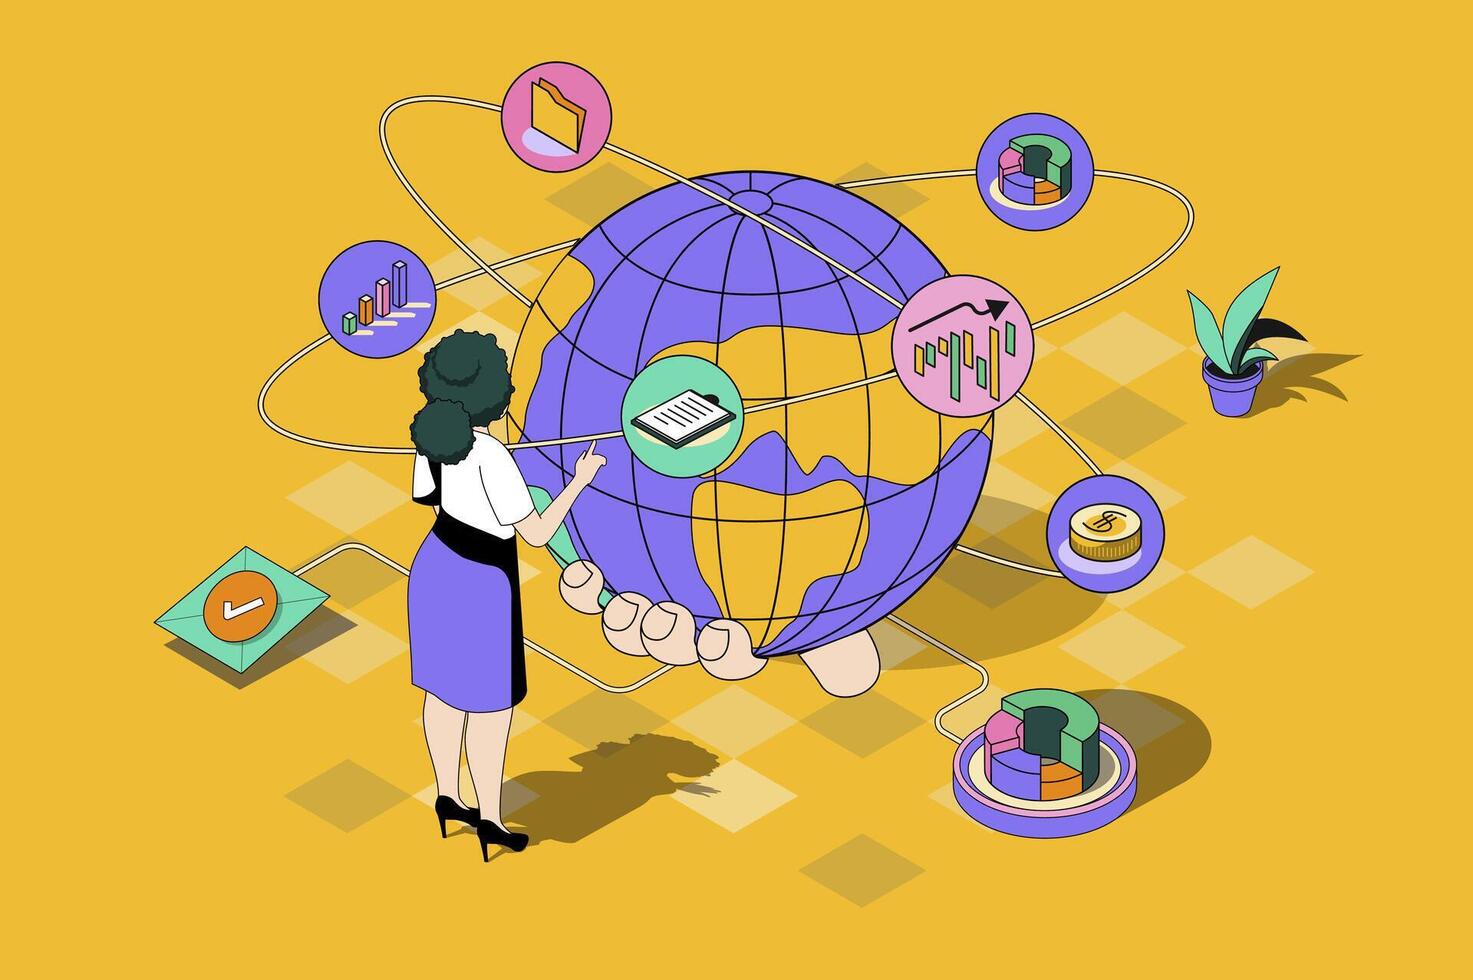 Global business web concept in 3d isometric design. Woman works and develops international company, sets tasks for employees and expands business. web illustration with people isometry scene vector